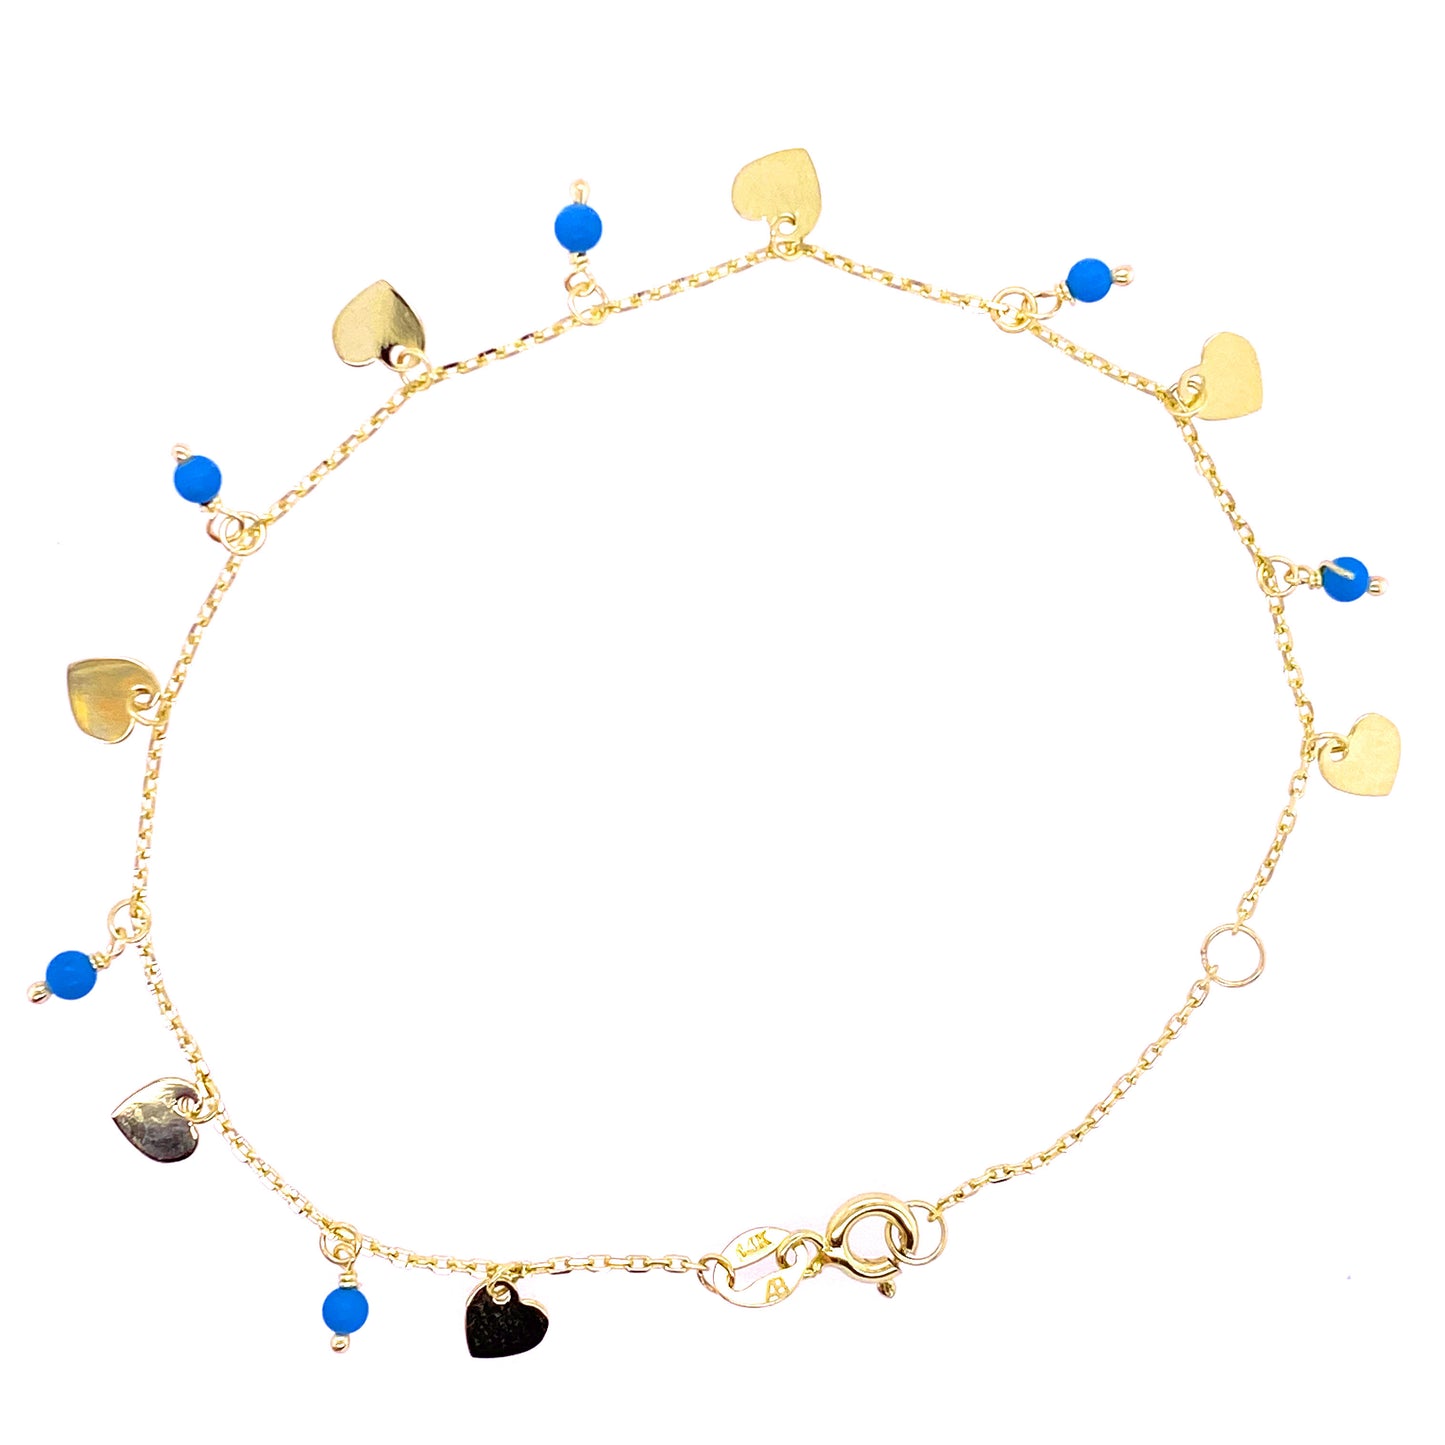 Dangling Hearts and Pearls/Turquoise Bracelet 14K Yellow Gold